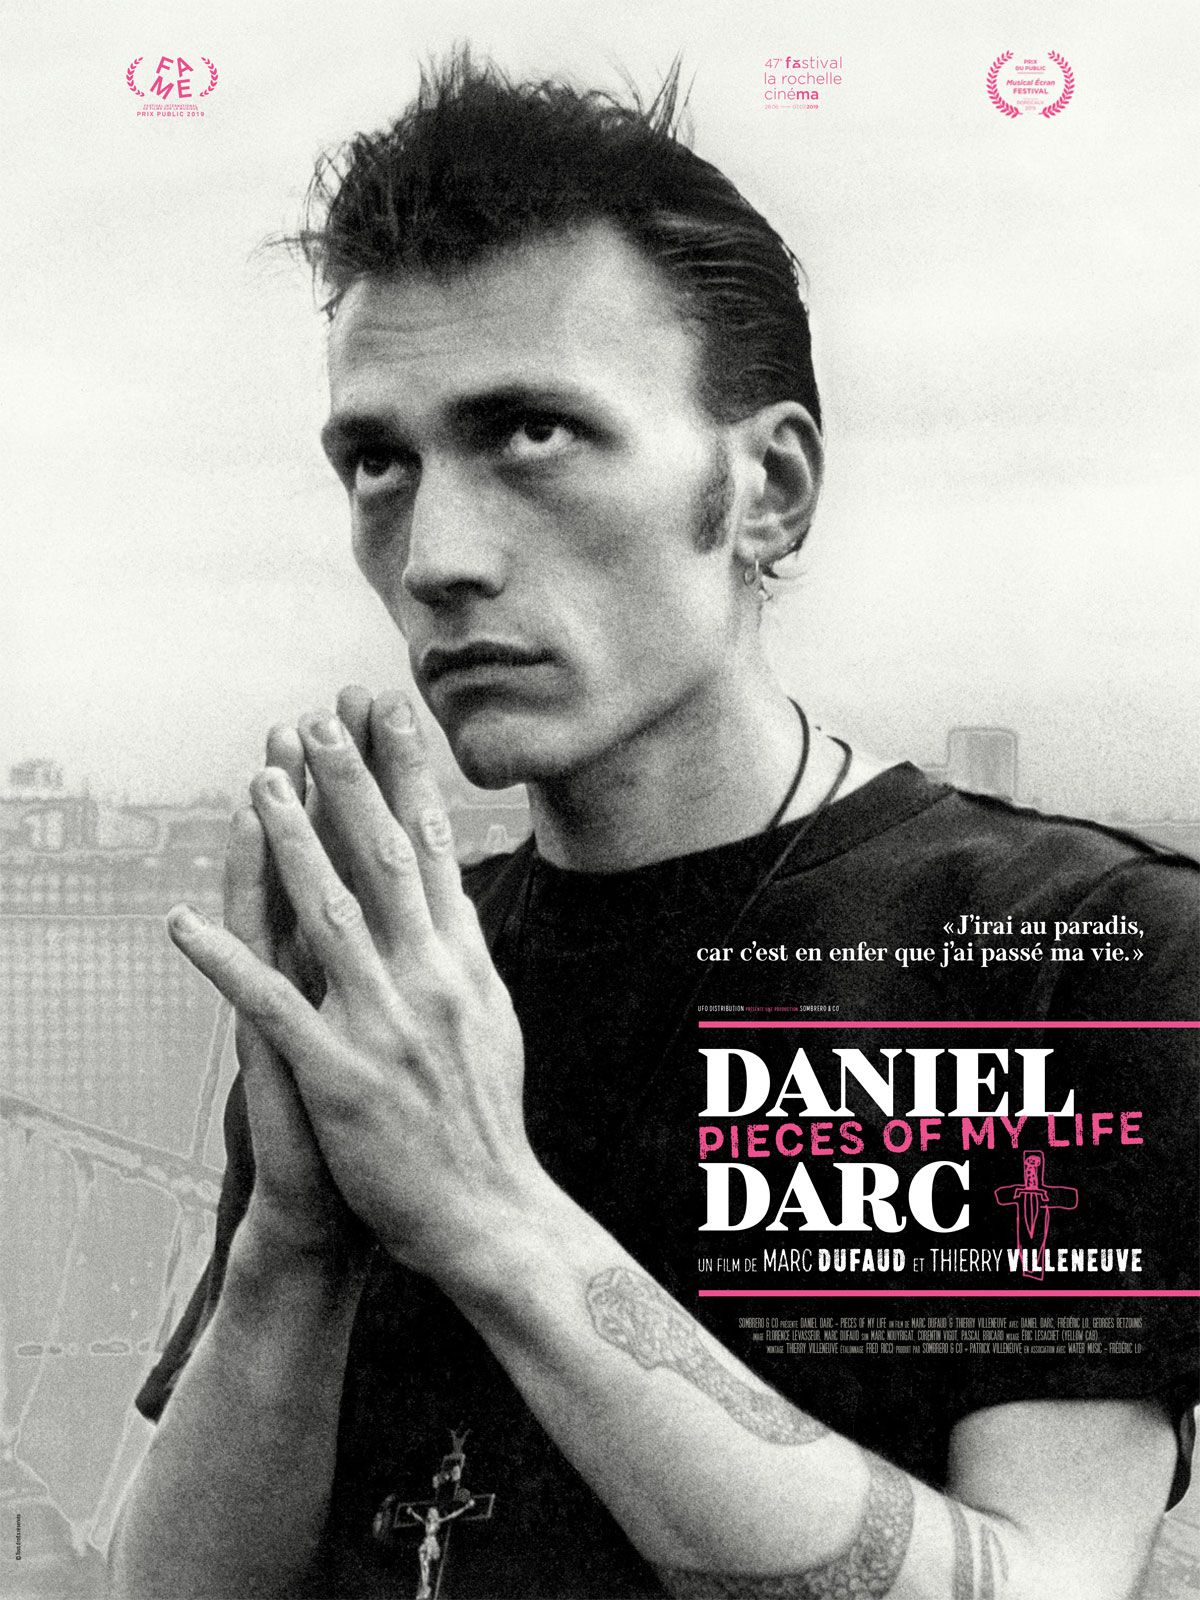 Daniel Darc : Pieces of My Life - Documentaire (2019) streaming VF gratuit complet